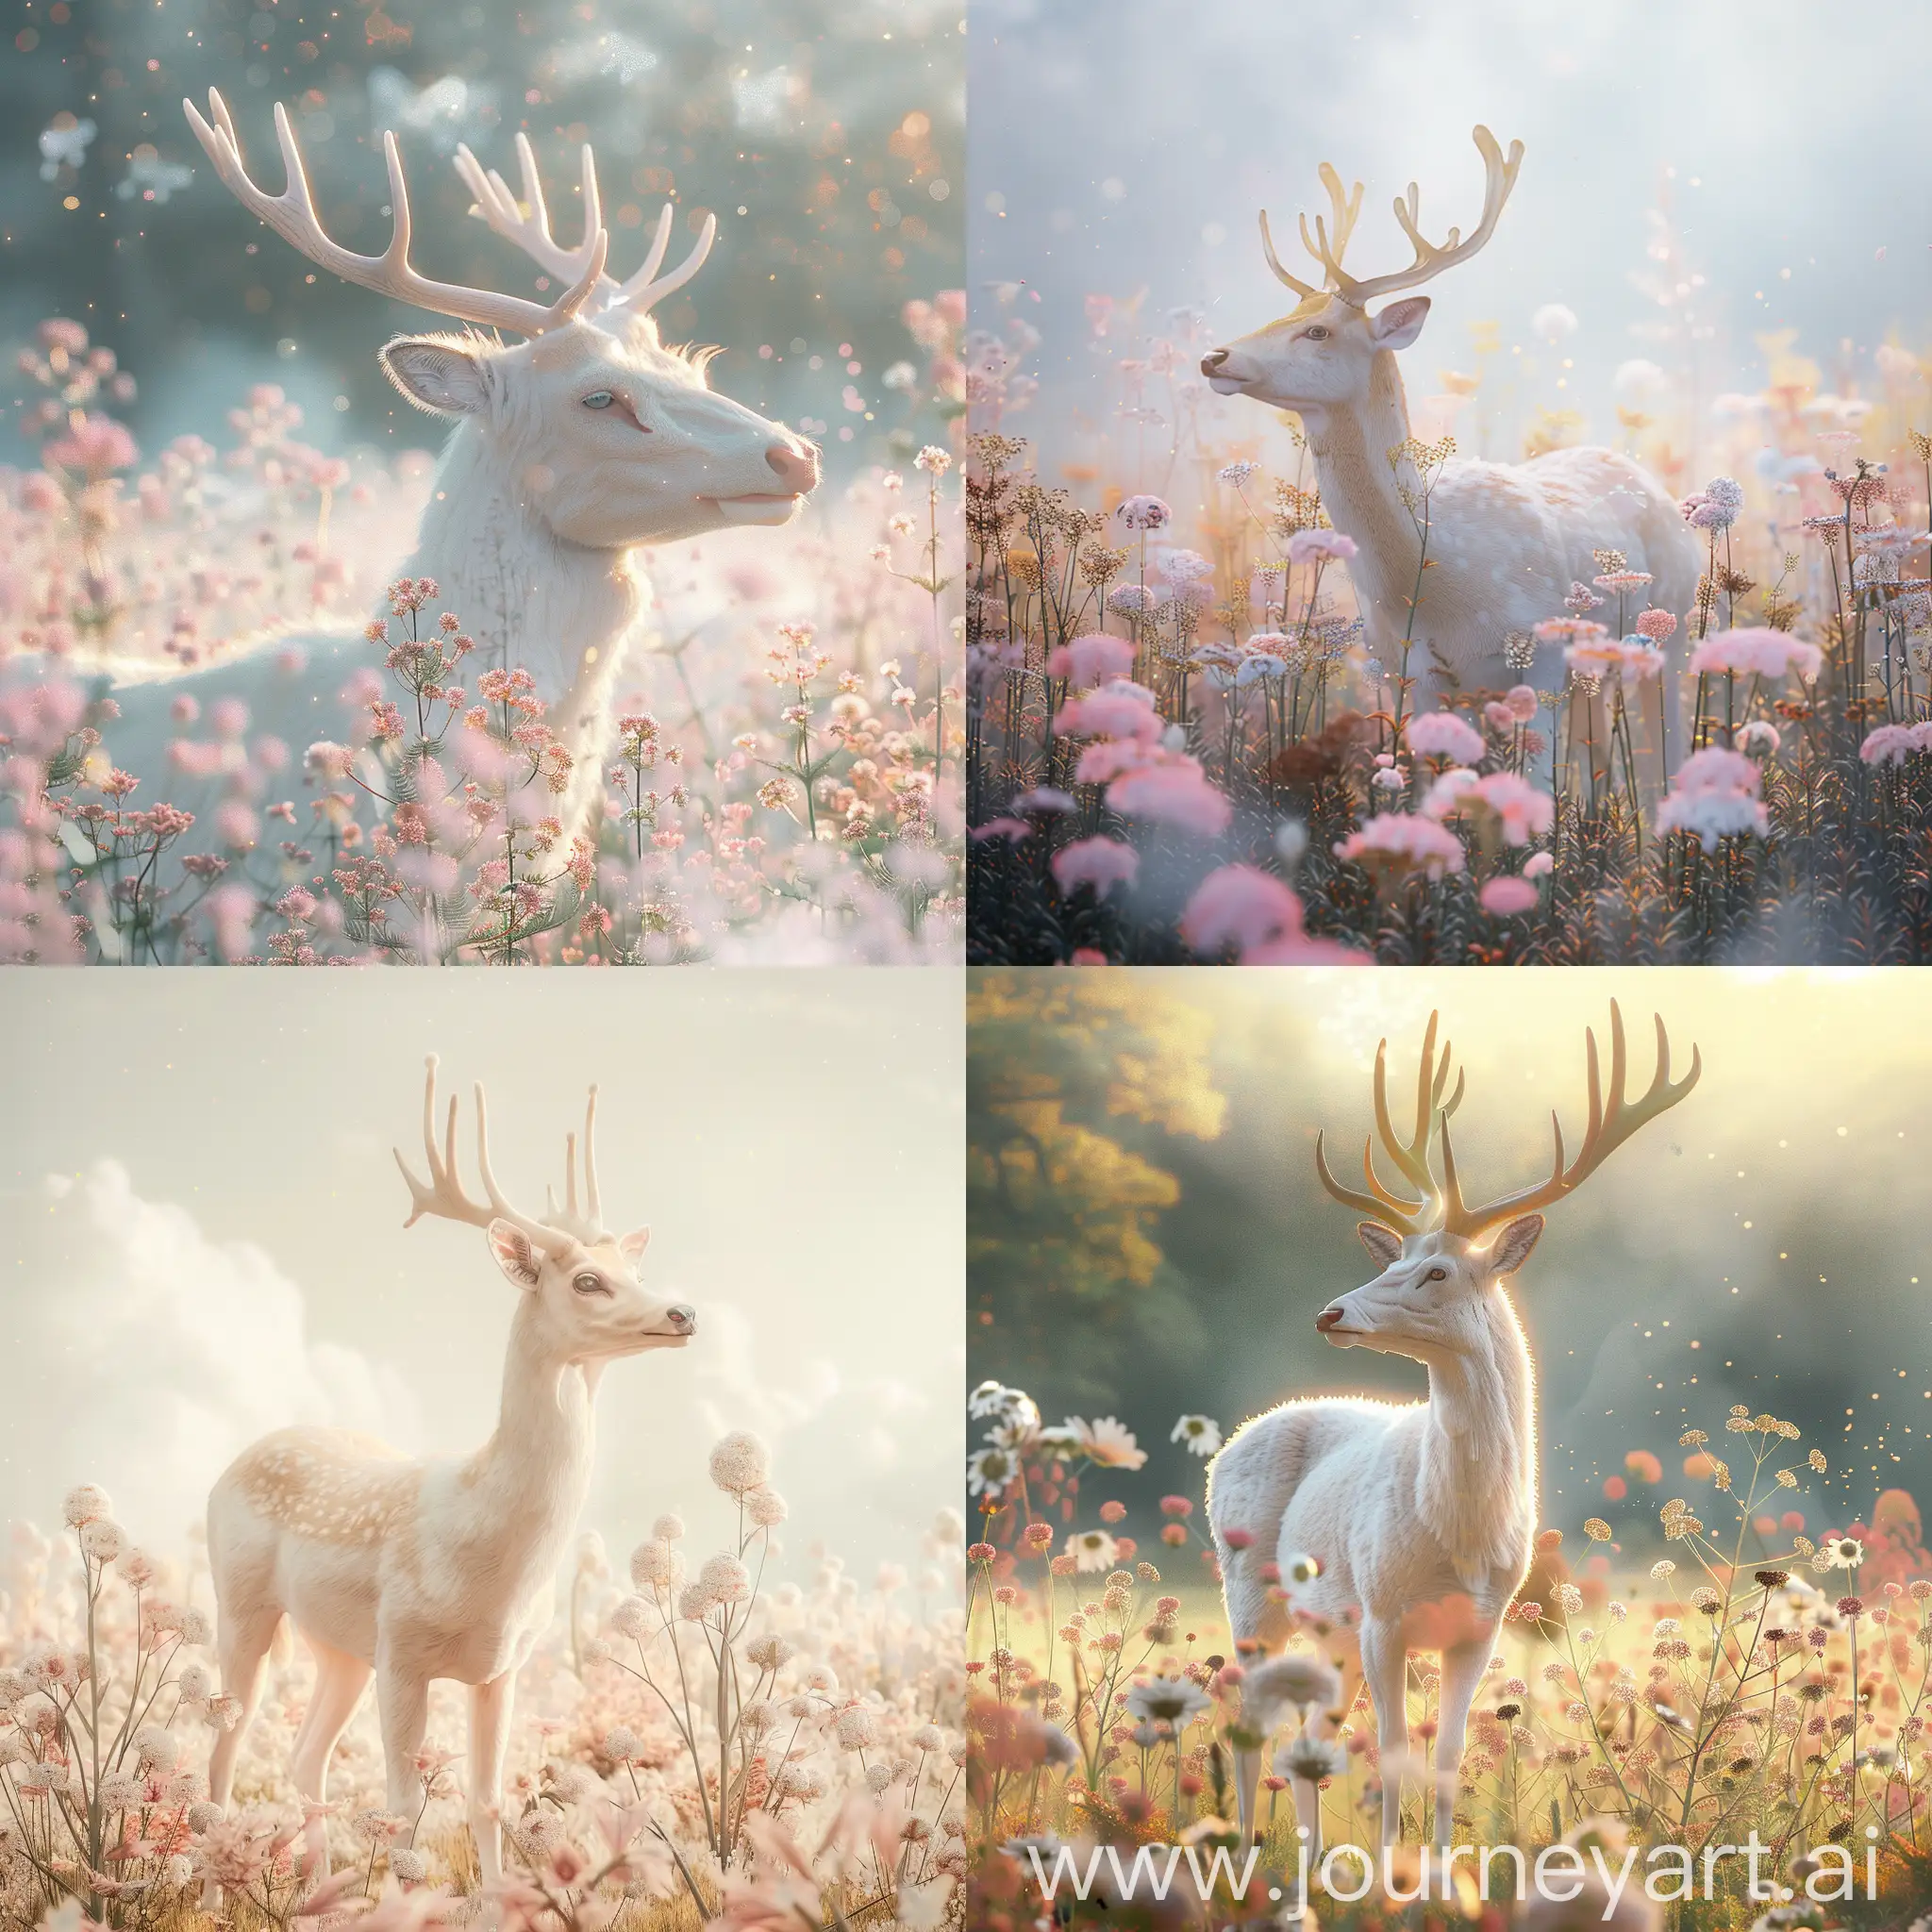 Realistic-White-Deer-Among-Field-Flowers-UltraDetailed-8K-Film-Photography